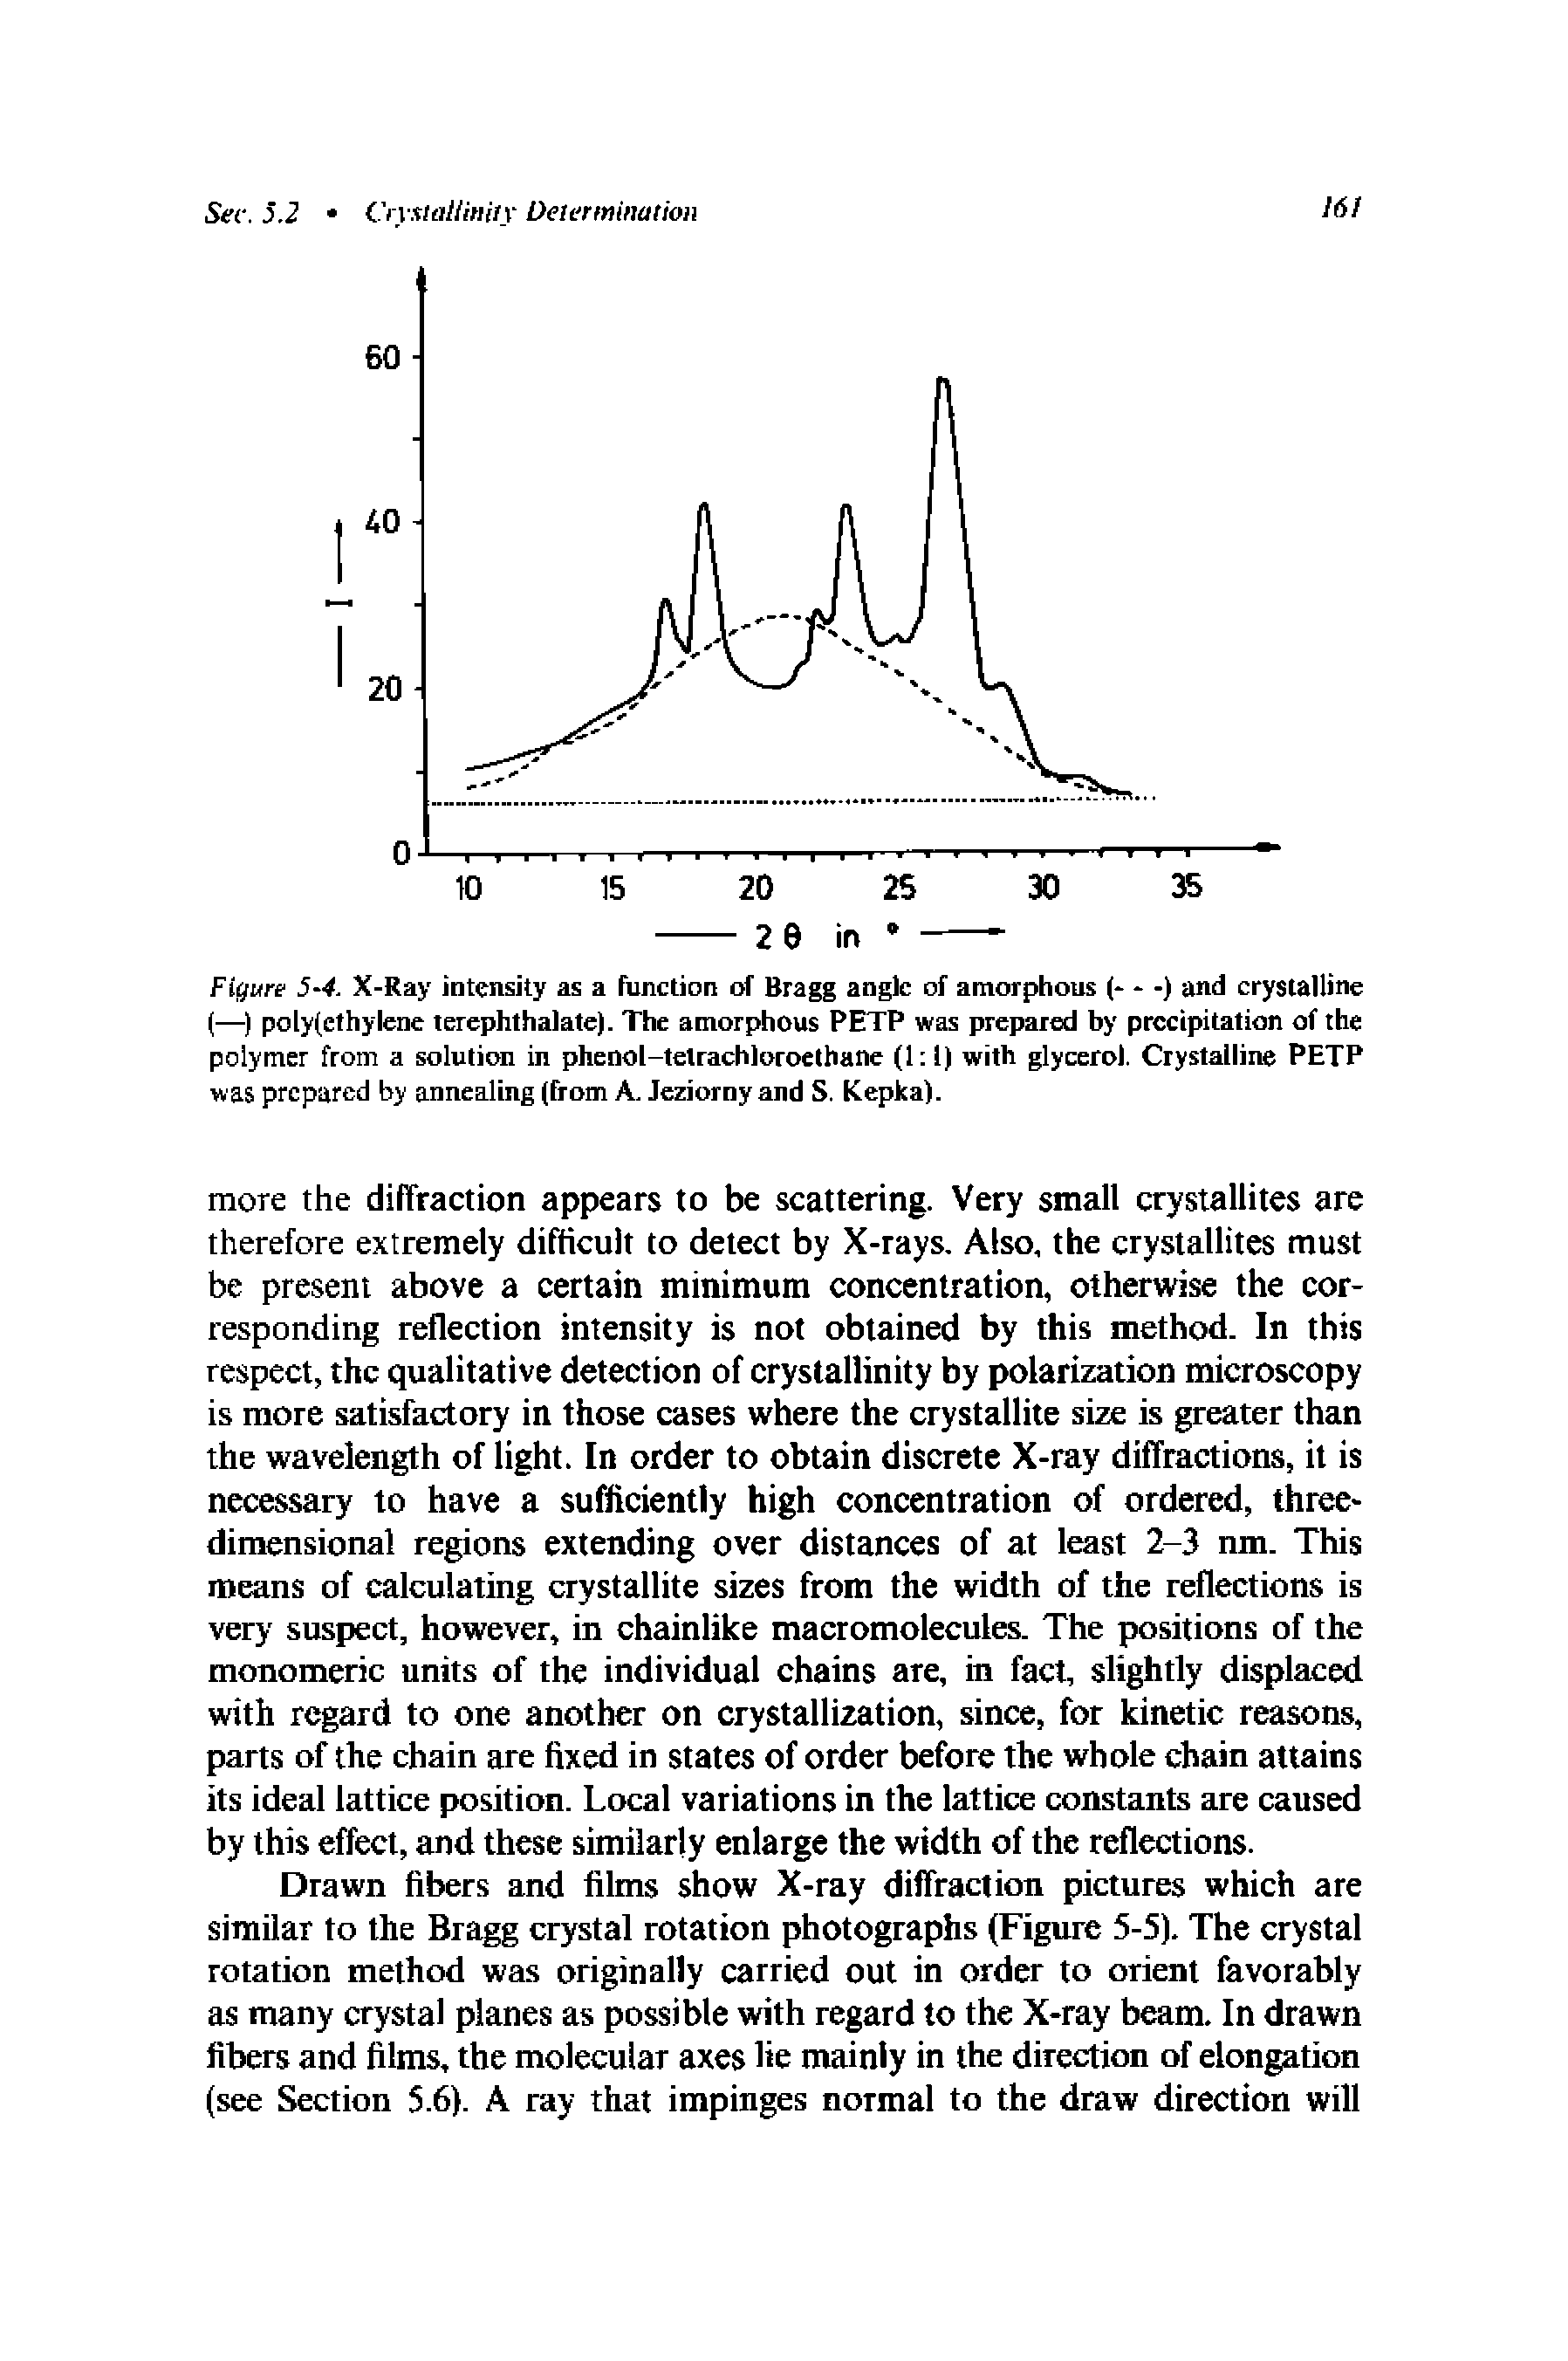 Figure 5-4. X-Ray intensity as a function of Bra angle of amorphous (- - -) and crystalline (—polyfethylene terephthalate). The amorphous PETP was prepared by precipitation of the polymer from a solution in phenol-tetrachloroethane (1 1) with glycerol. Crystalline PETP was prepared by annealing (from A. Jeziorny and S. Kepka).